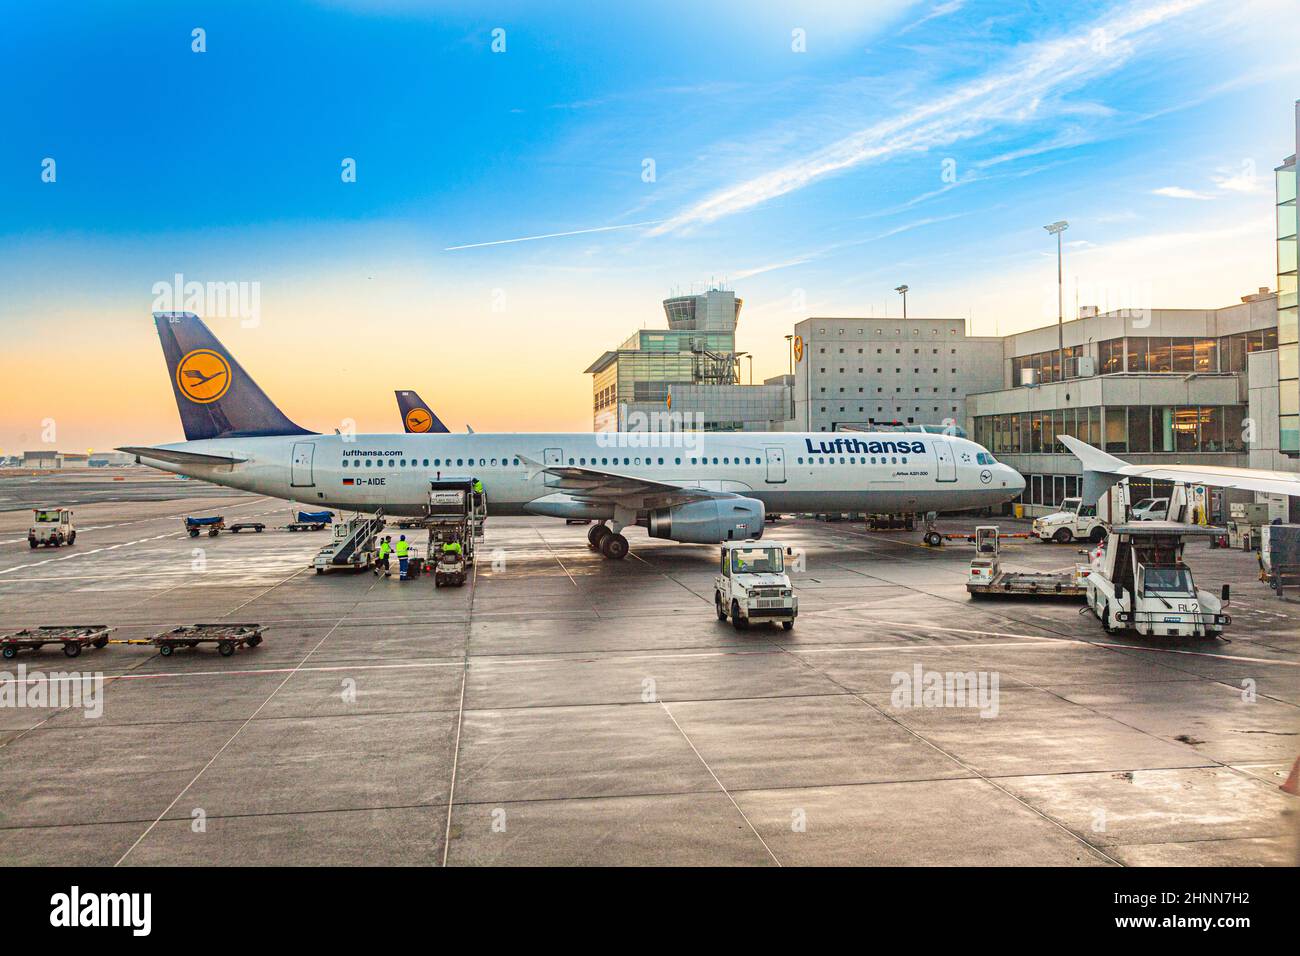 terminal 2 in sunset with Lufthansa aircraft at gate.  Frankfurt is one of the busiest airport in Europe with 59 million passengers in 2011. Stock Photo